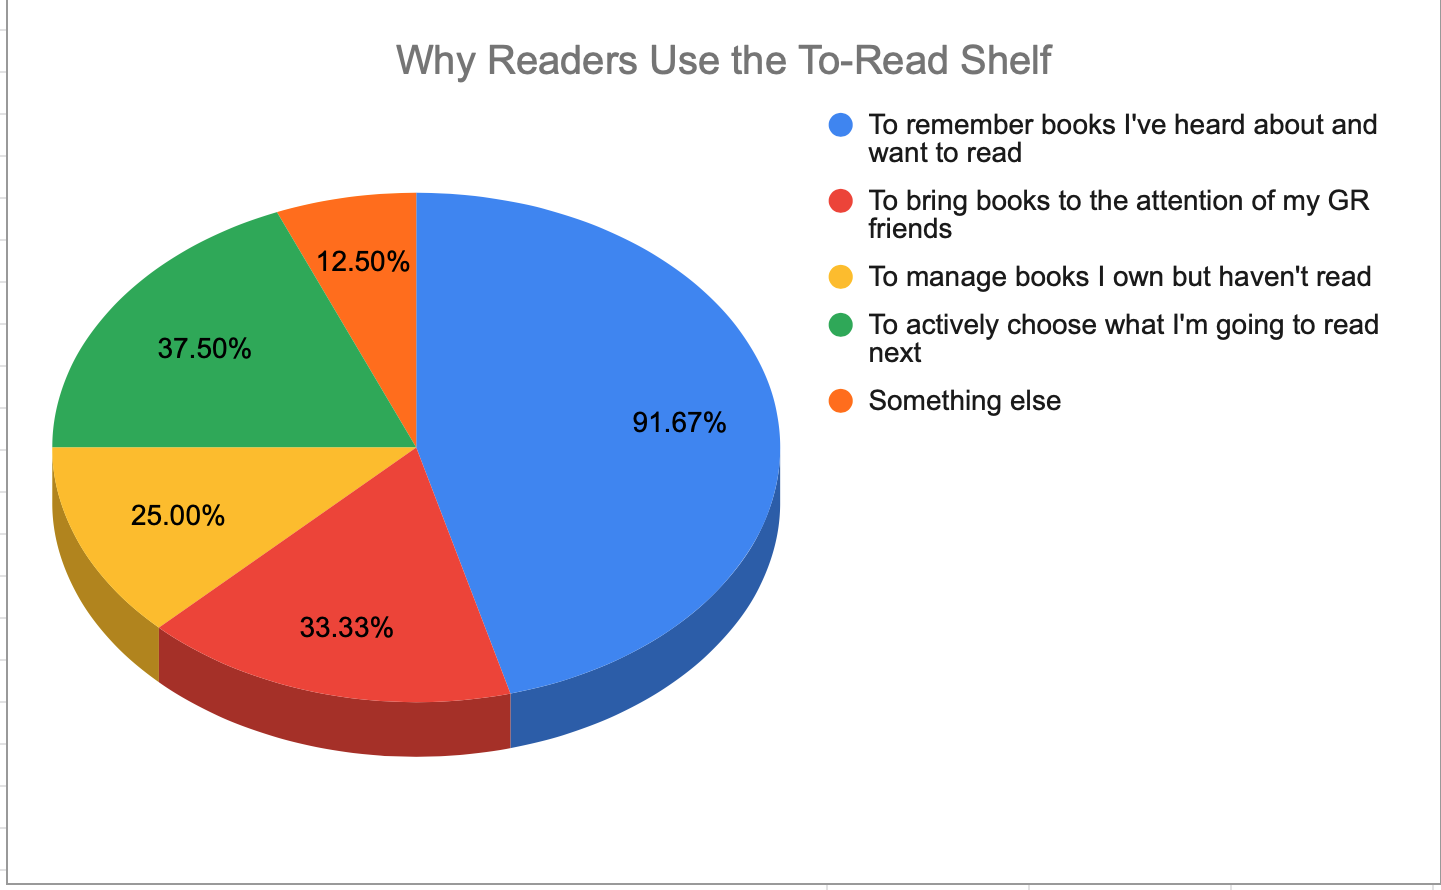 Chart showing why readers use the to-read shelf on Goodreads